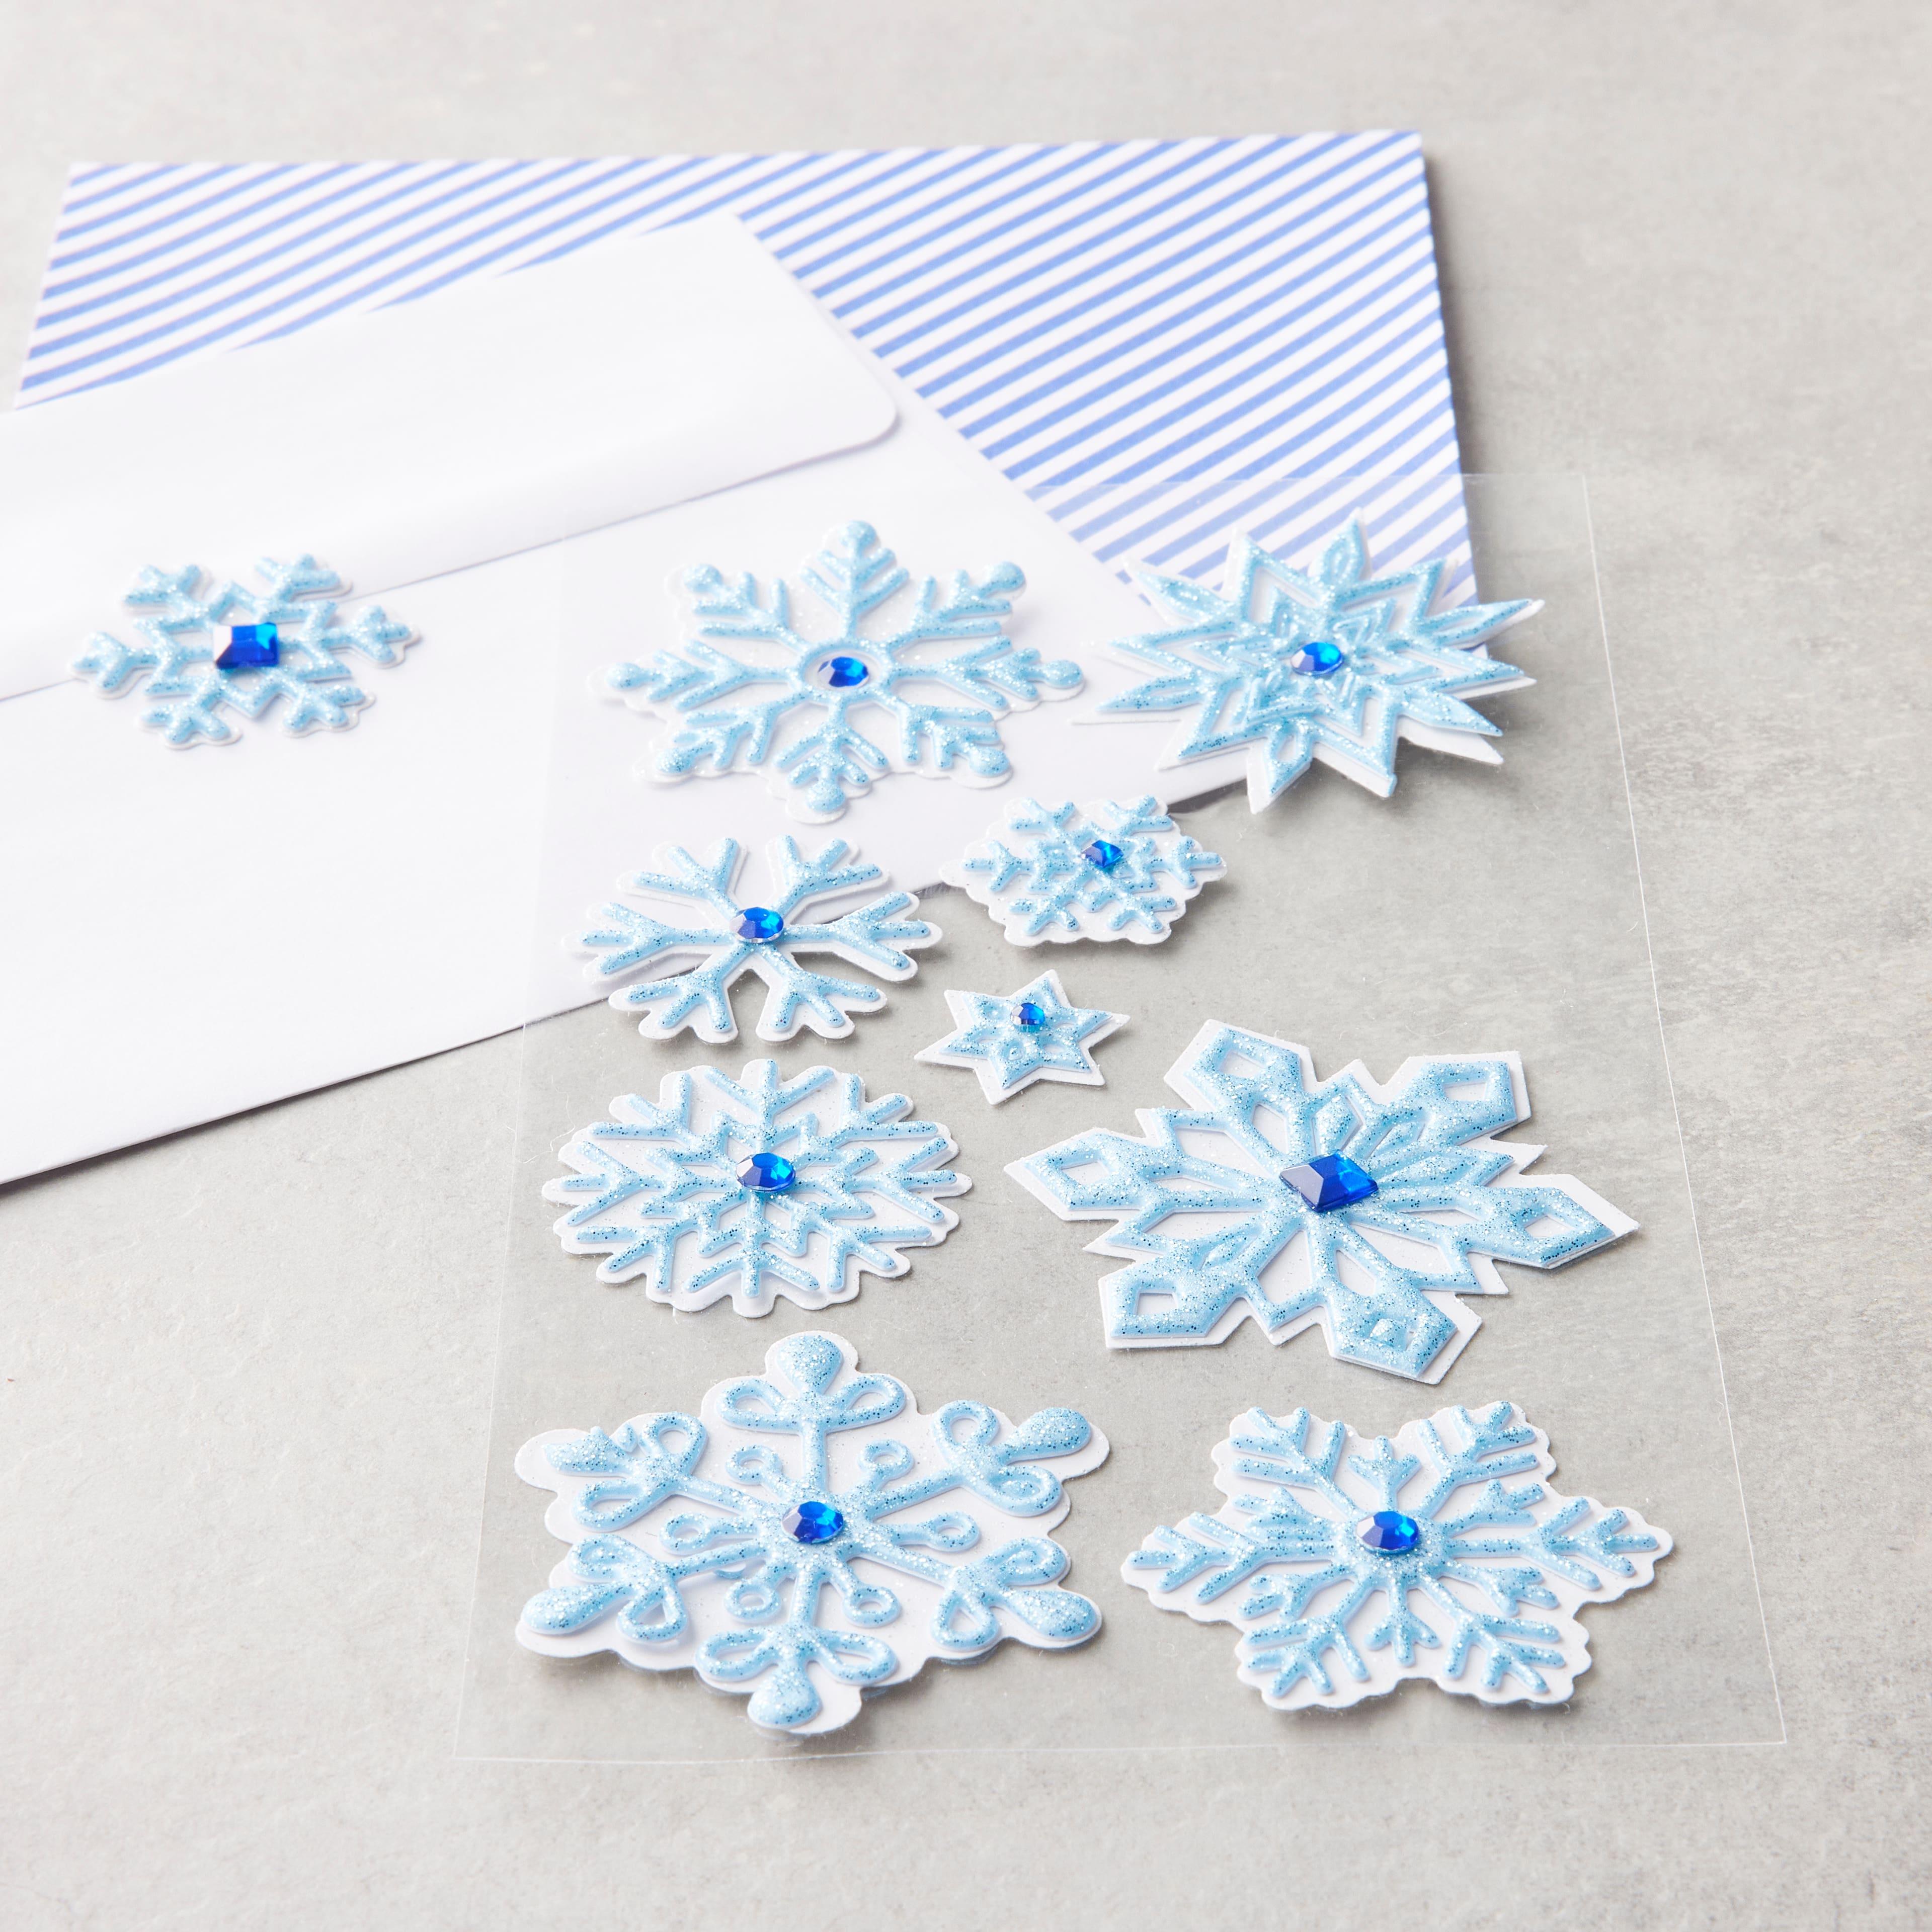 300 Pieces Snowflake Dimensional Stickers Christmas 3D Snowflake Stickers  Diamond Snowflake Winter Decoration Stickers for Christmas Holiday  Envelopes